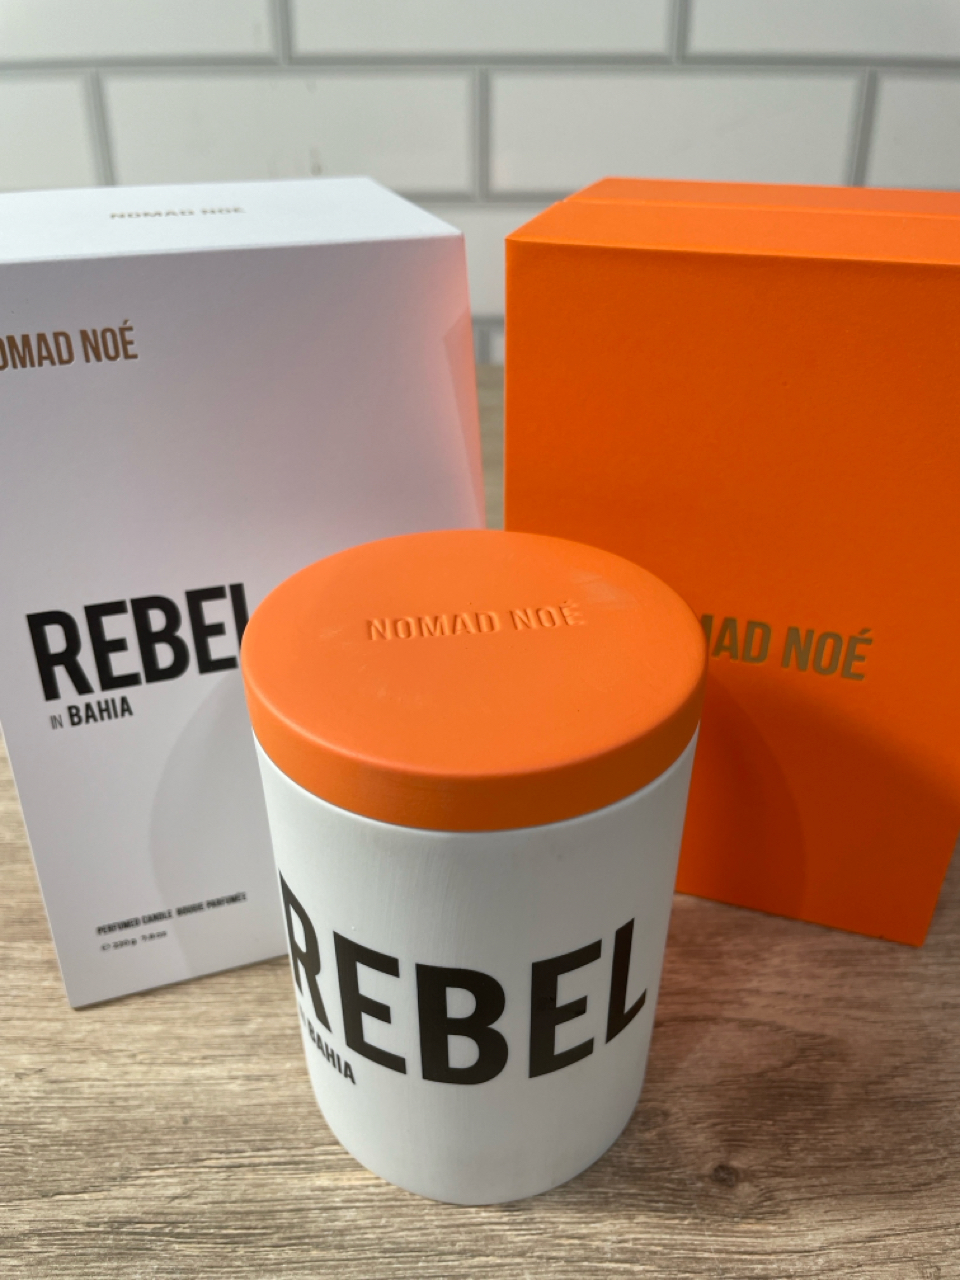 Rebel Scented Candle from Nomad Noe - Image 4 of 4